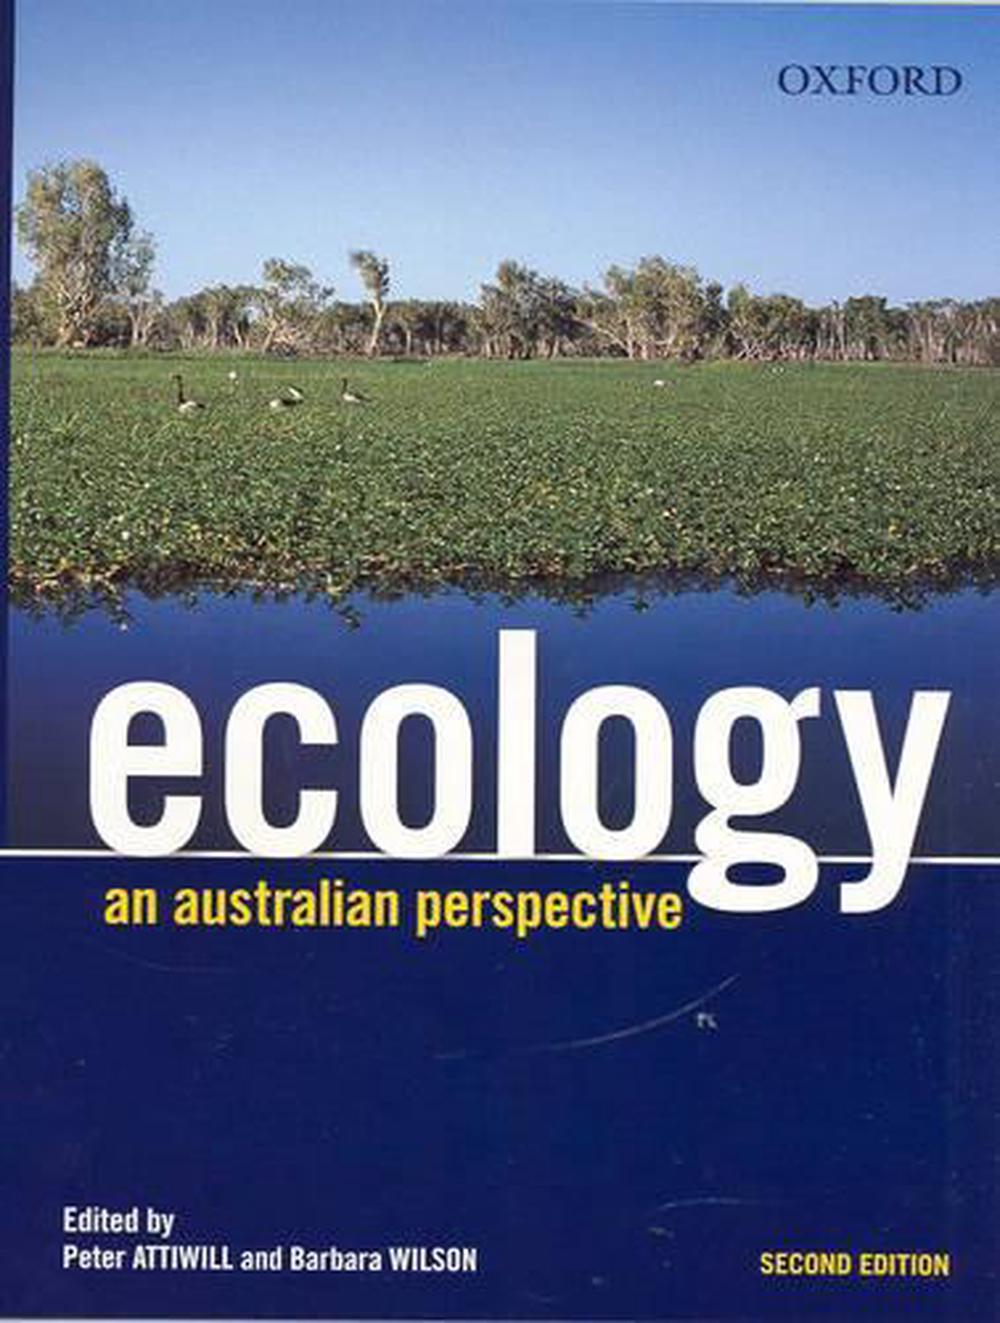 Ecology An Australian Perspective, 2nd Edition by Peter Attiwill